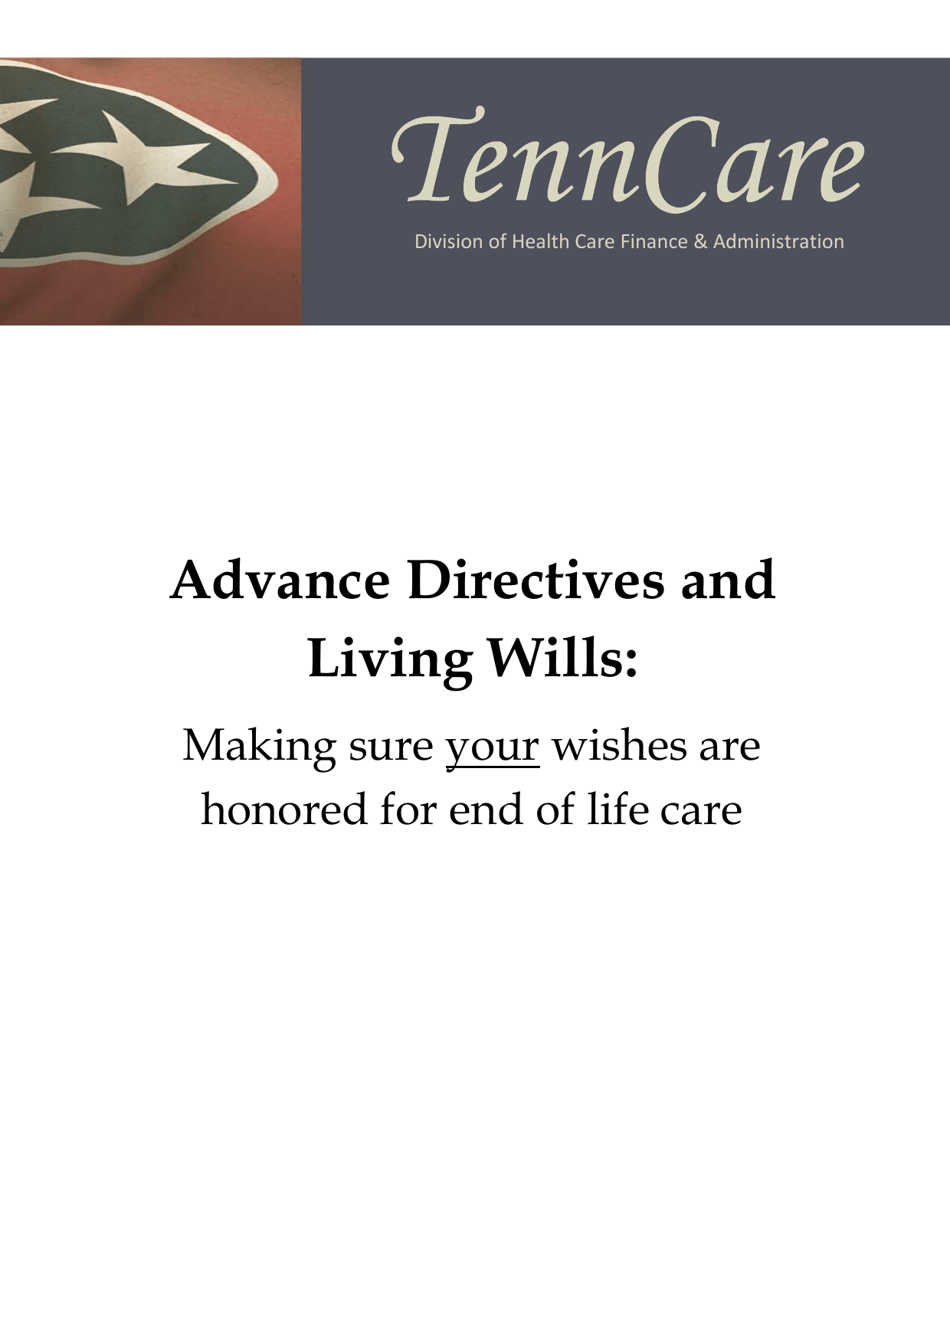 Tennessee Advance Directives and Living Wills Booklet - Tennessee, Page 1